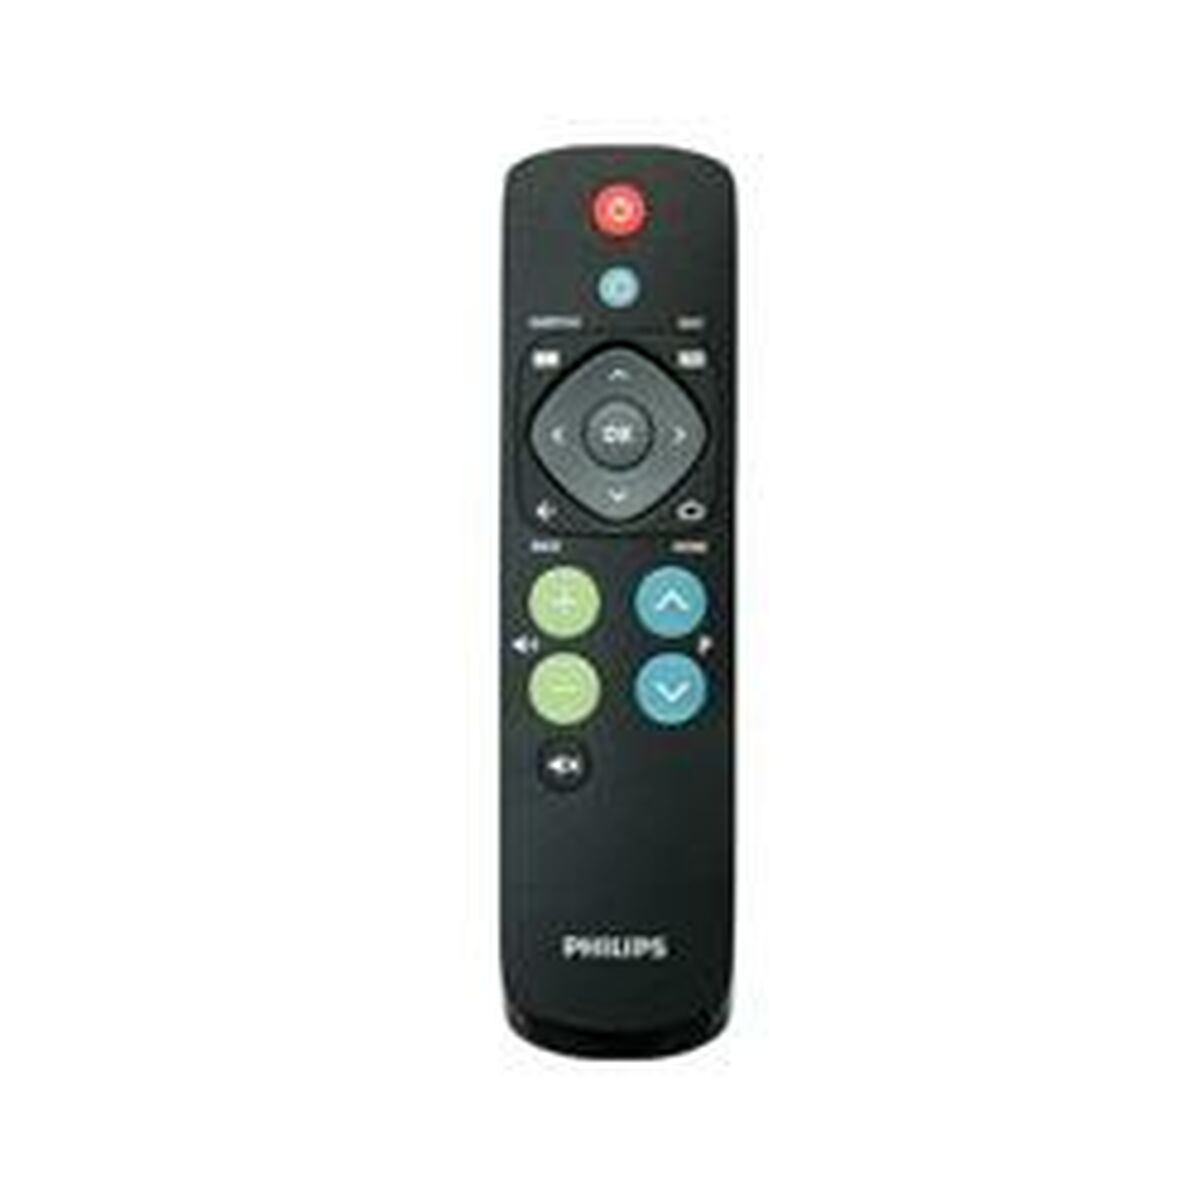 Remote control Philips 22AV1601A/12, Philips, Electronics, Photography and video cameras, remote-control-philips-22av1601a-12, Brand_Philips, category-reference-2609, category-reference-2932, category-reference-2936, category-reference-t-19653, category-reference-t-8122, category-reference-t-8123, category-reference-t-8124, category-reference-t-8130, Condition_NEW, fotografía, Price_50 - 100, travel, RiotNook